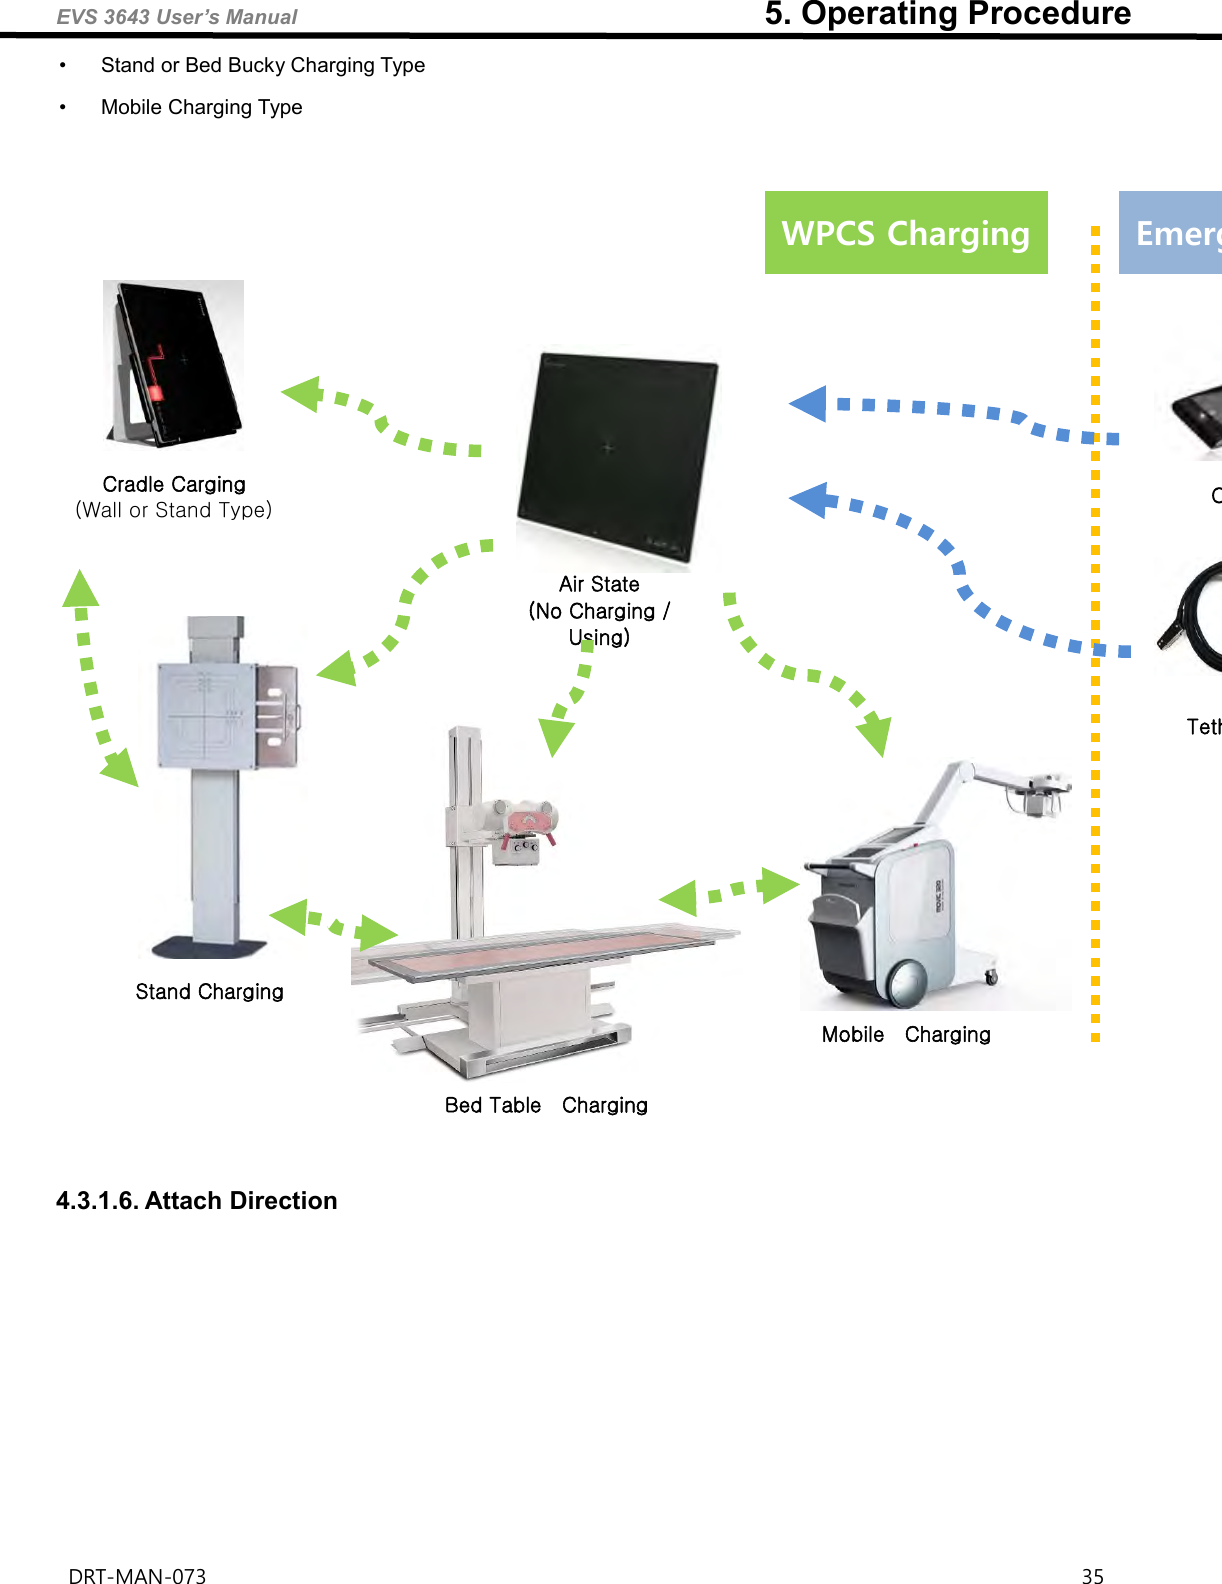 EVS 3643 User’s Manual                                                        5. Operating Procedure DRT-MAN-073                                                                                                                                                                35  •  Stand or Bed Bucky Charging Type •  Mobile Charging Type    4.3.1.6. Attach Direction Cradle Carging (Wall or Stand Type) Air State (No Charging / Using) Stand Charging Bed Table    Charging Mobile    Charging WPCS Charging Emergency Charging Charger Tether Cable + Power Adaptor 